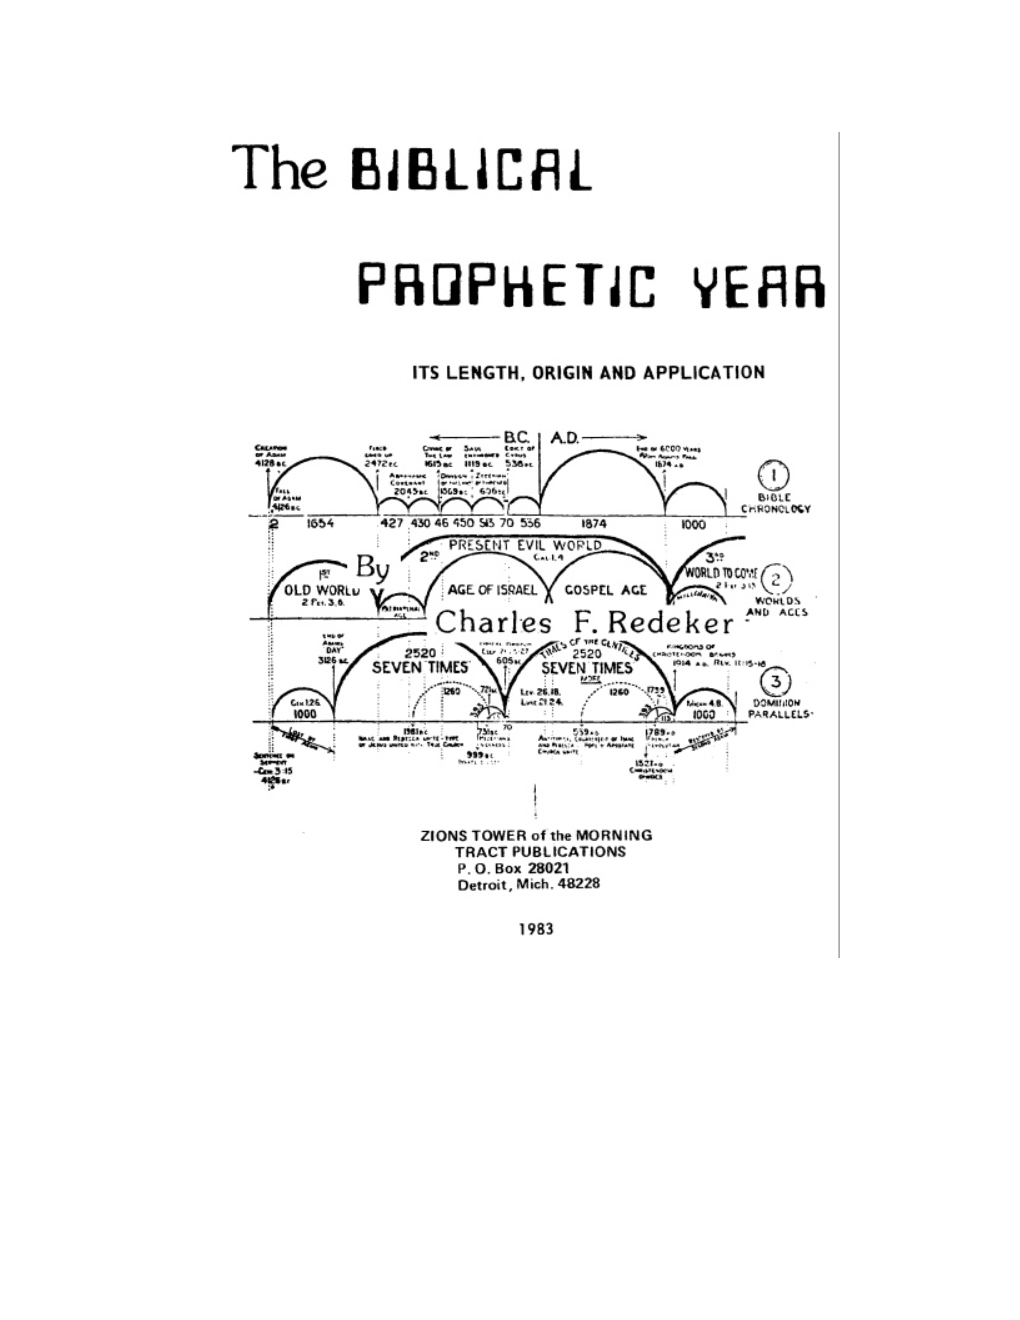 The BIBLICAL PROPHETIC YEAR ITS LENGTH, ORIGIN and APPLICATION